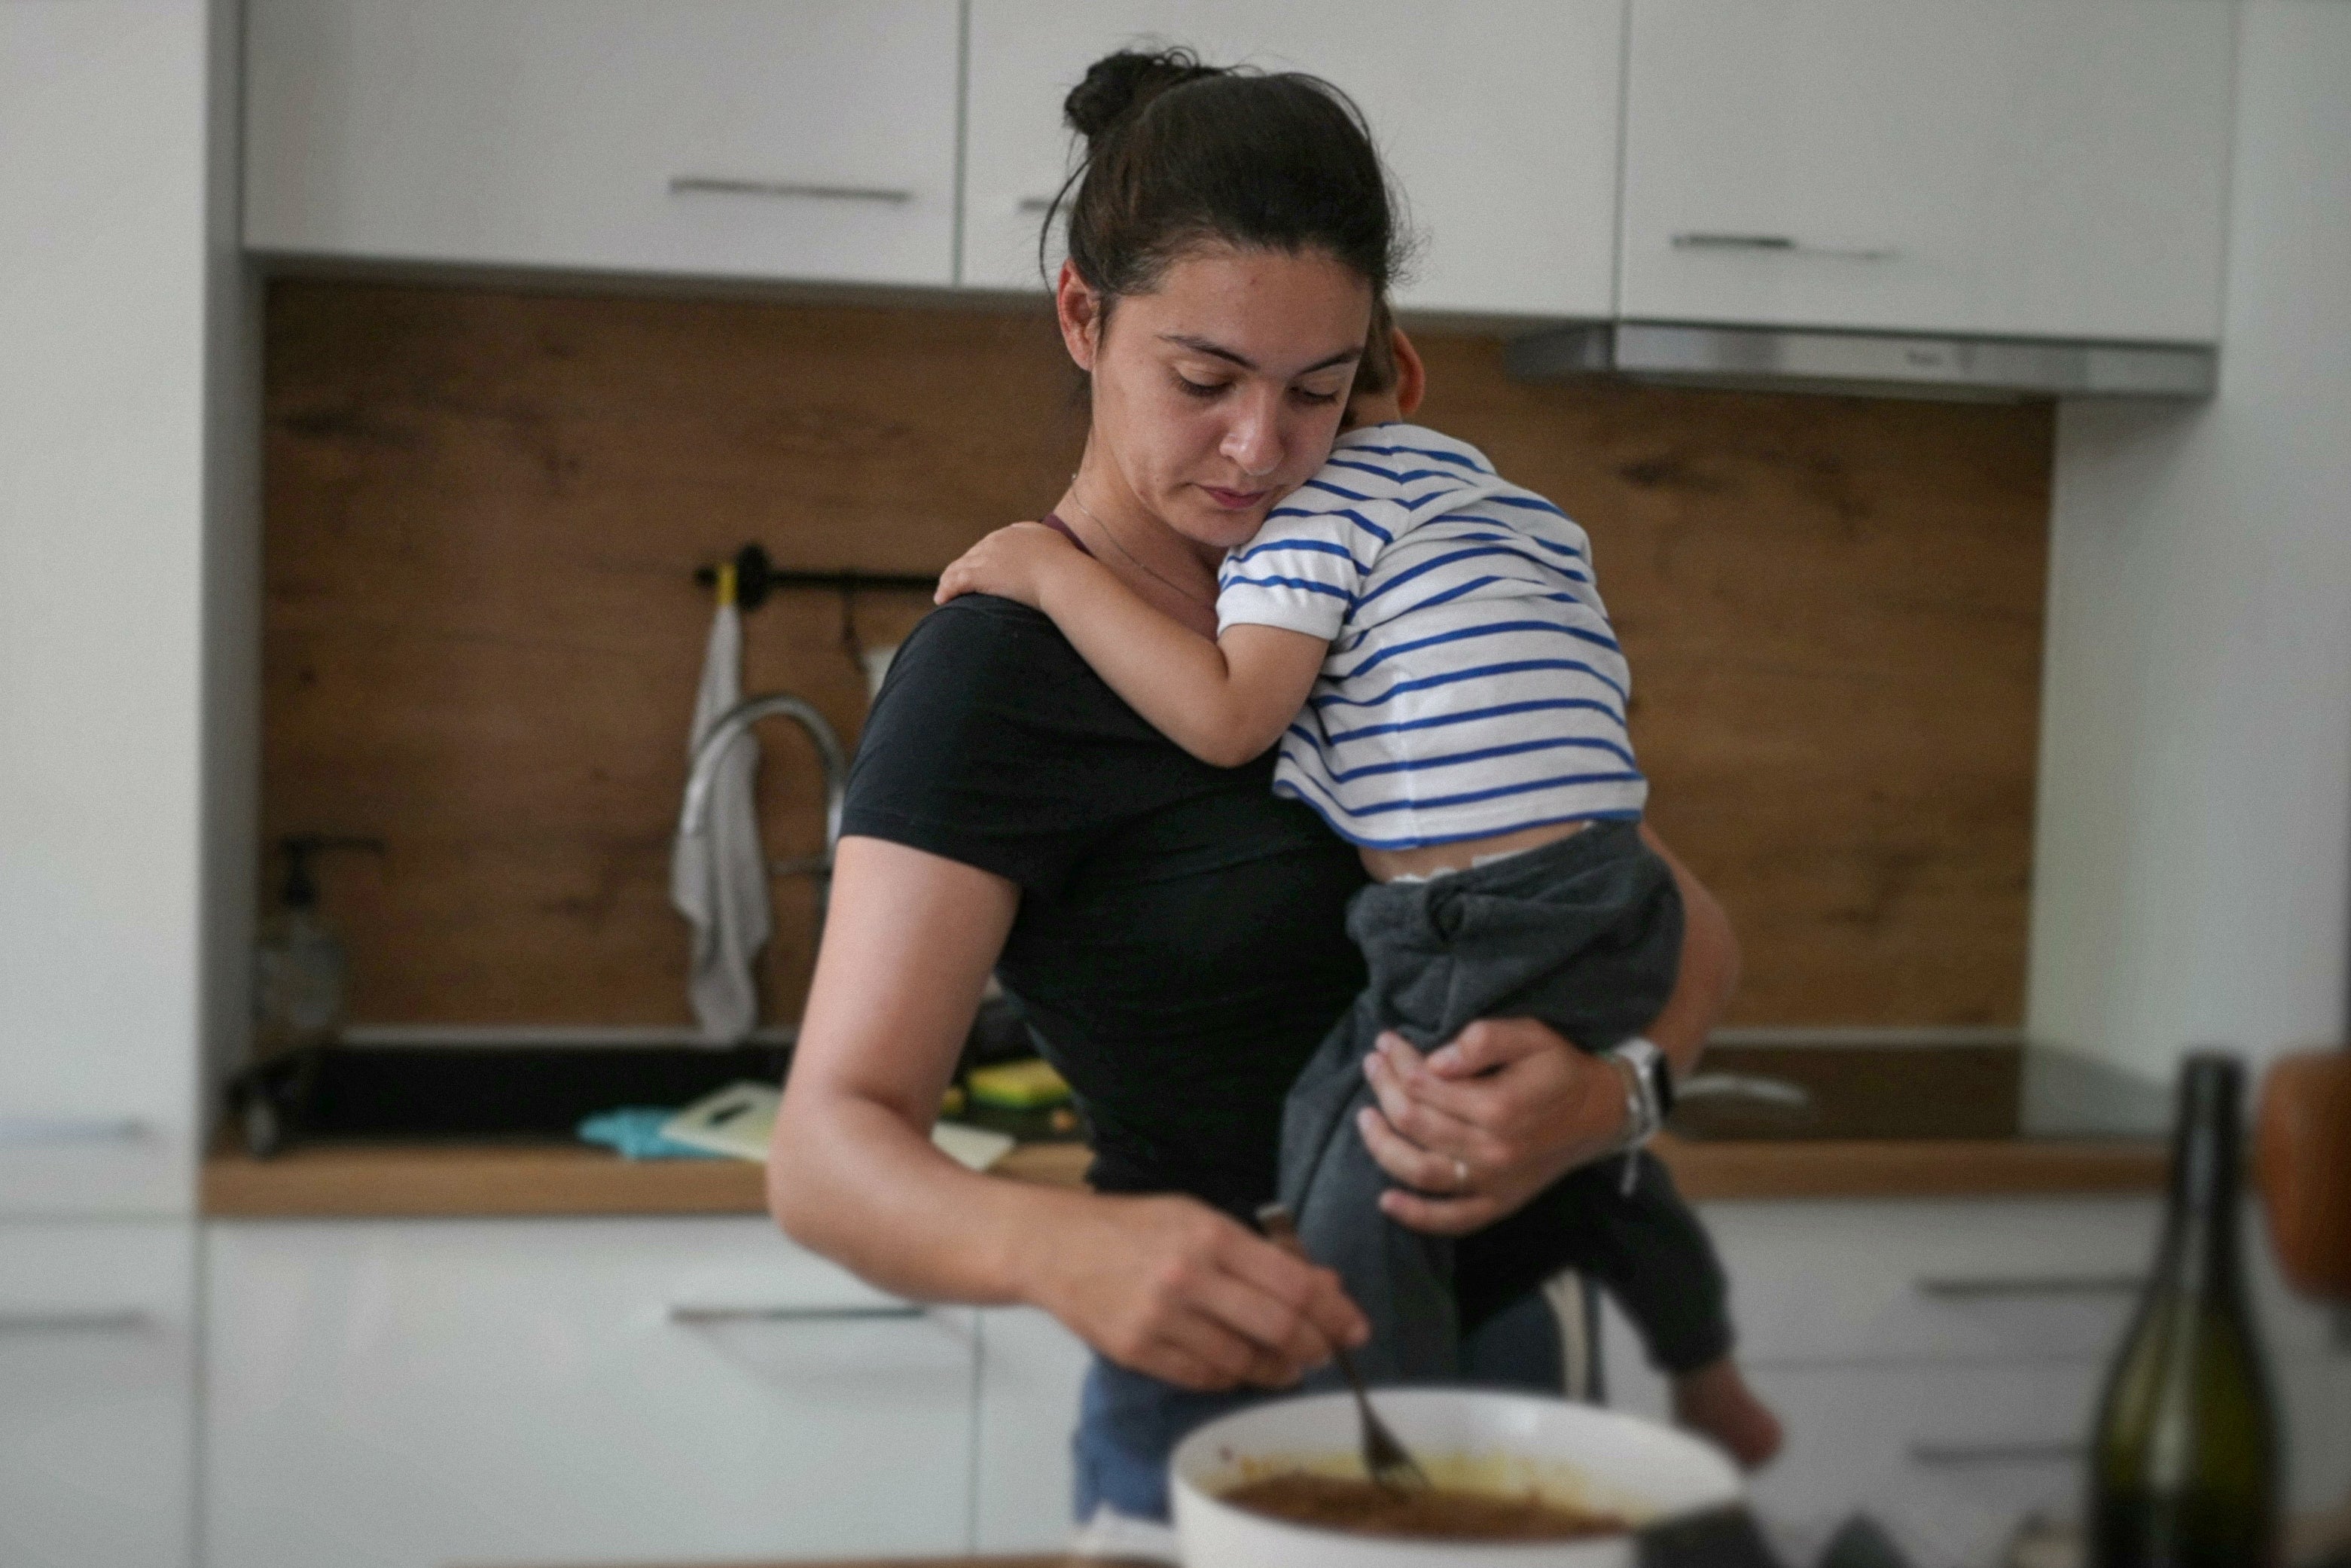 A woman stirs something on a stove while also holding a toddler. 